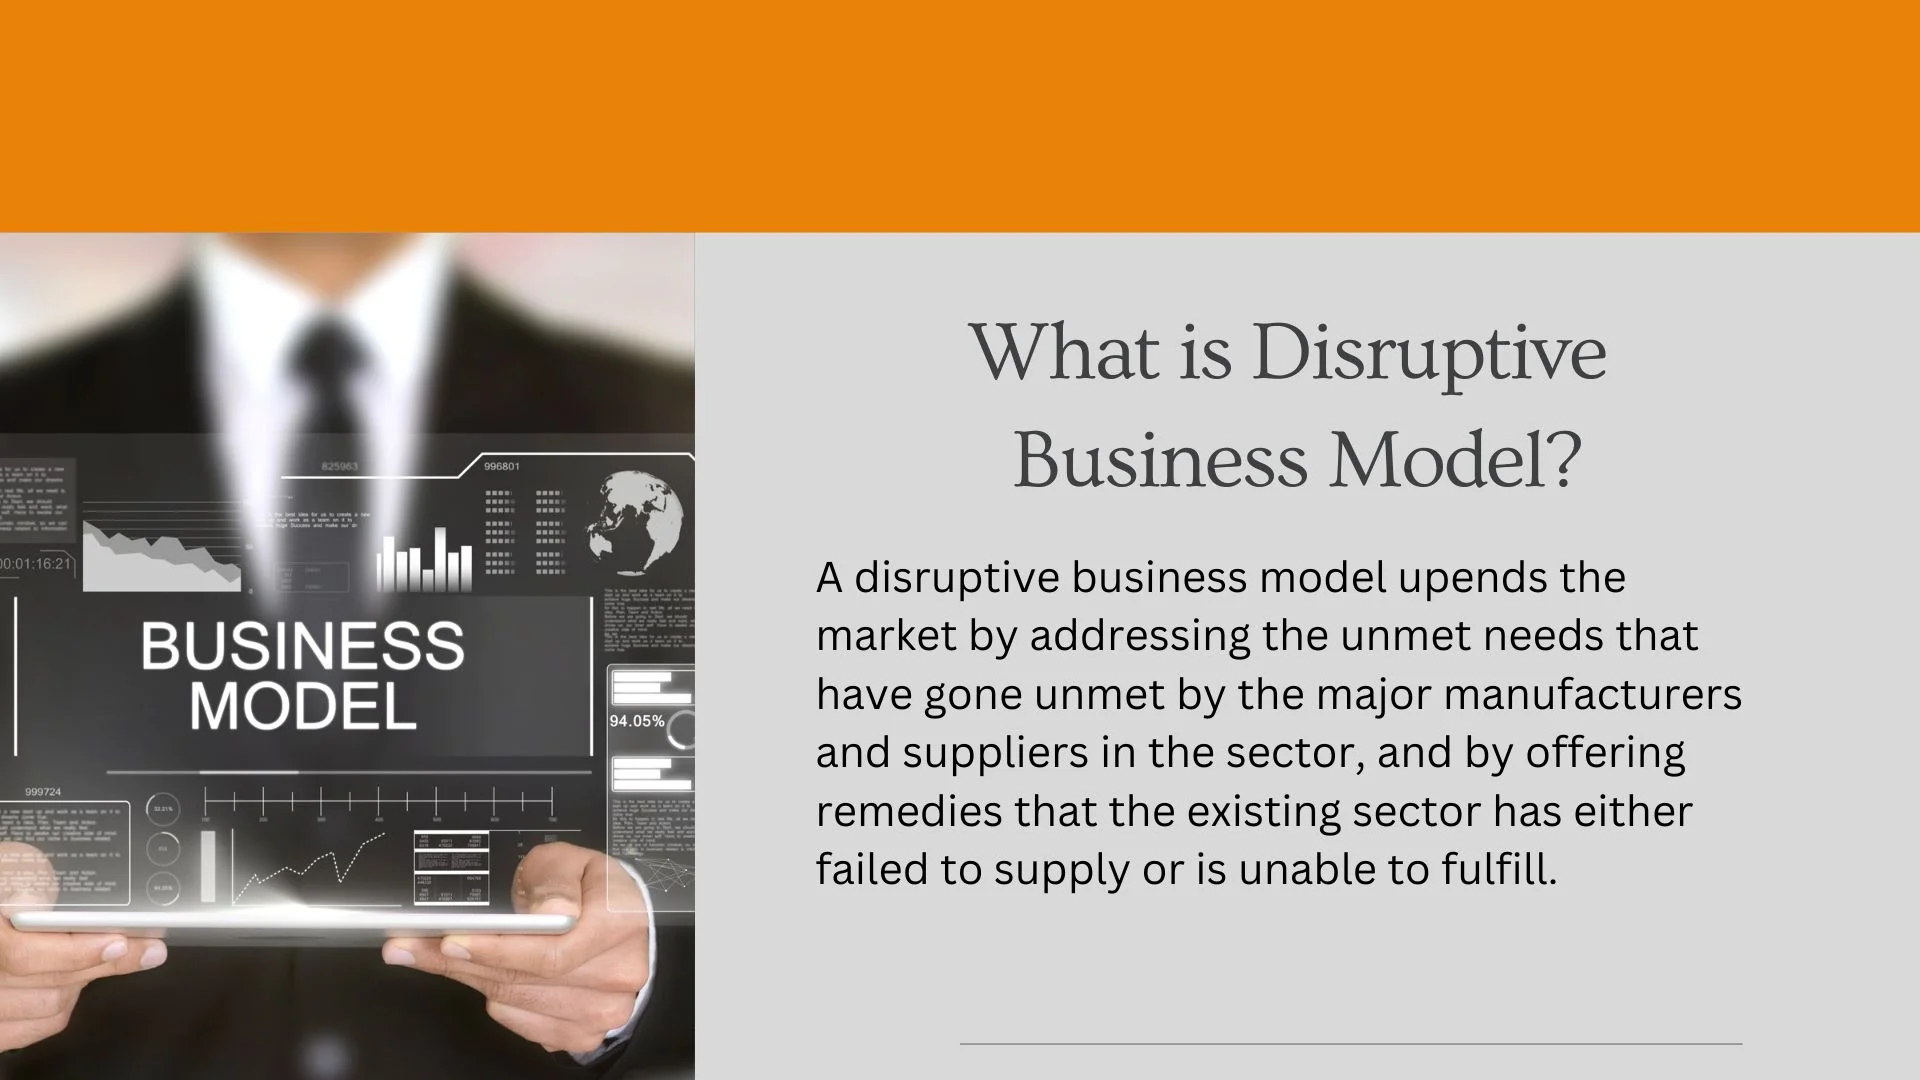 What is Disruptive Business Model